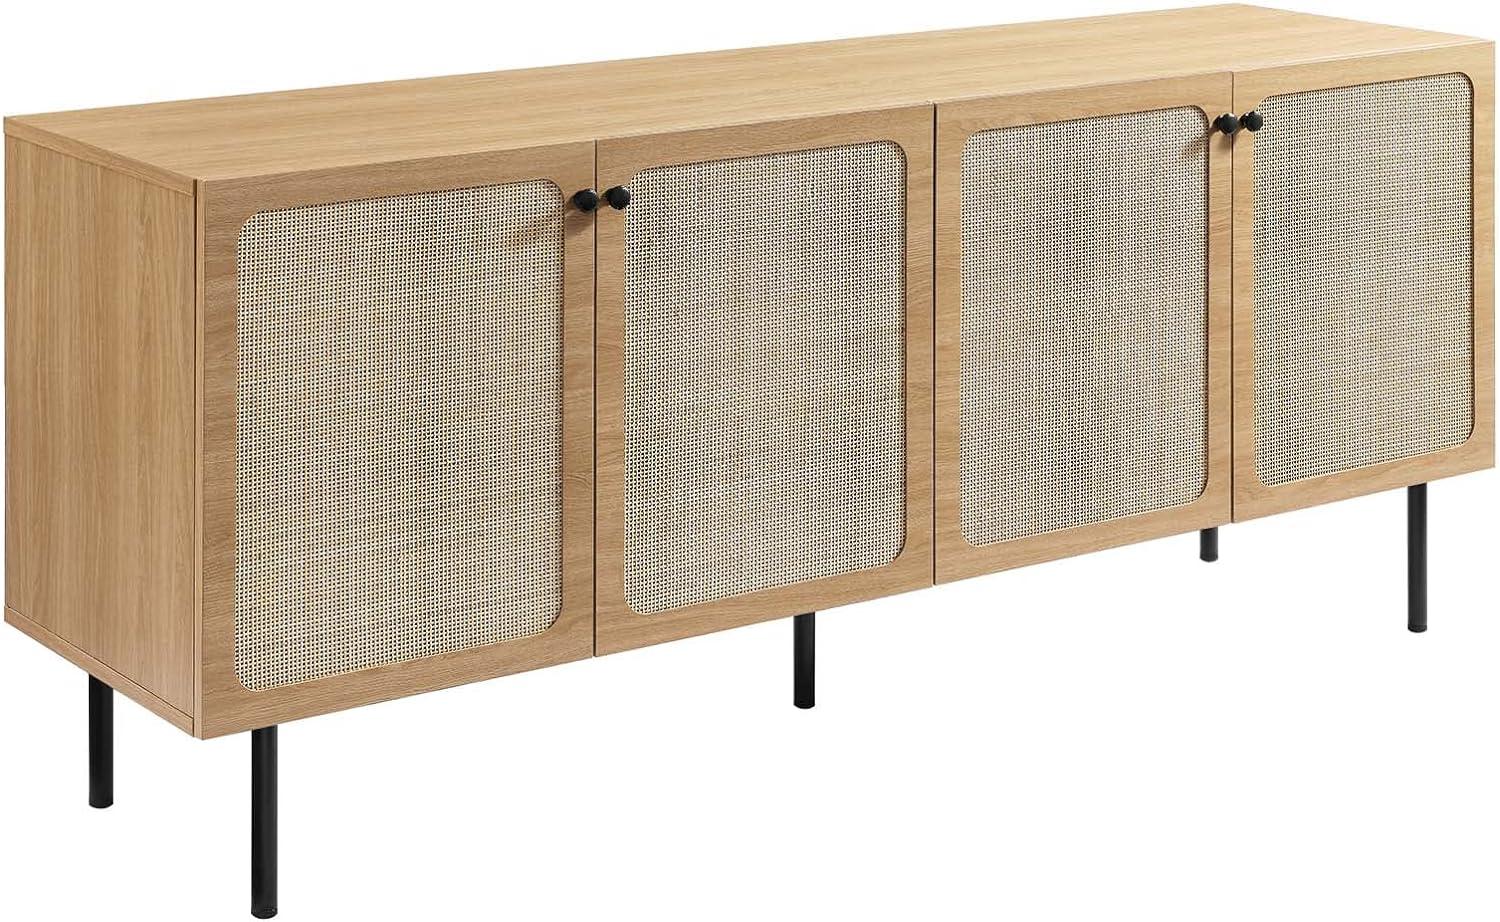 Chaucer Oak Wood Grain Textured Sideboard with Rattan Weaving